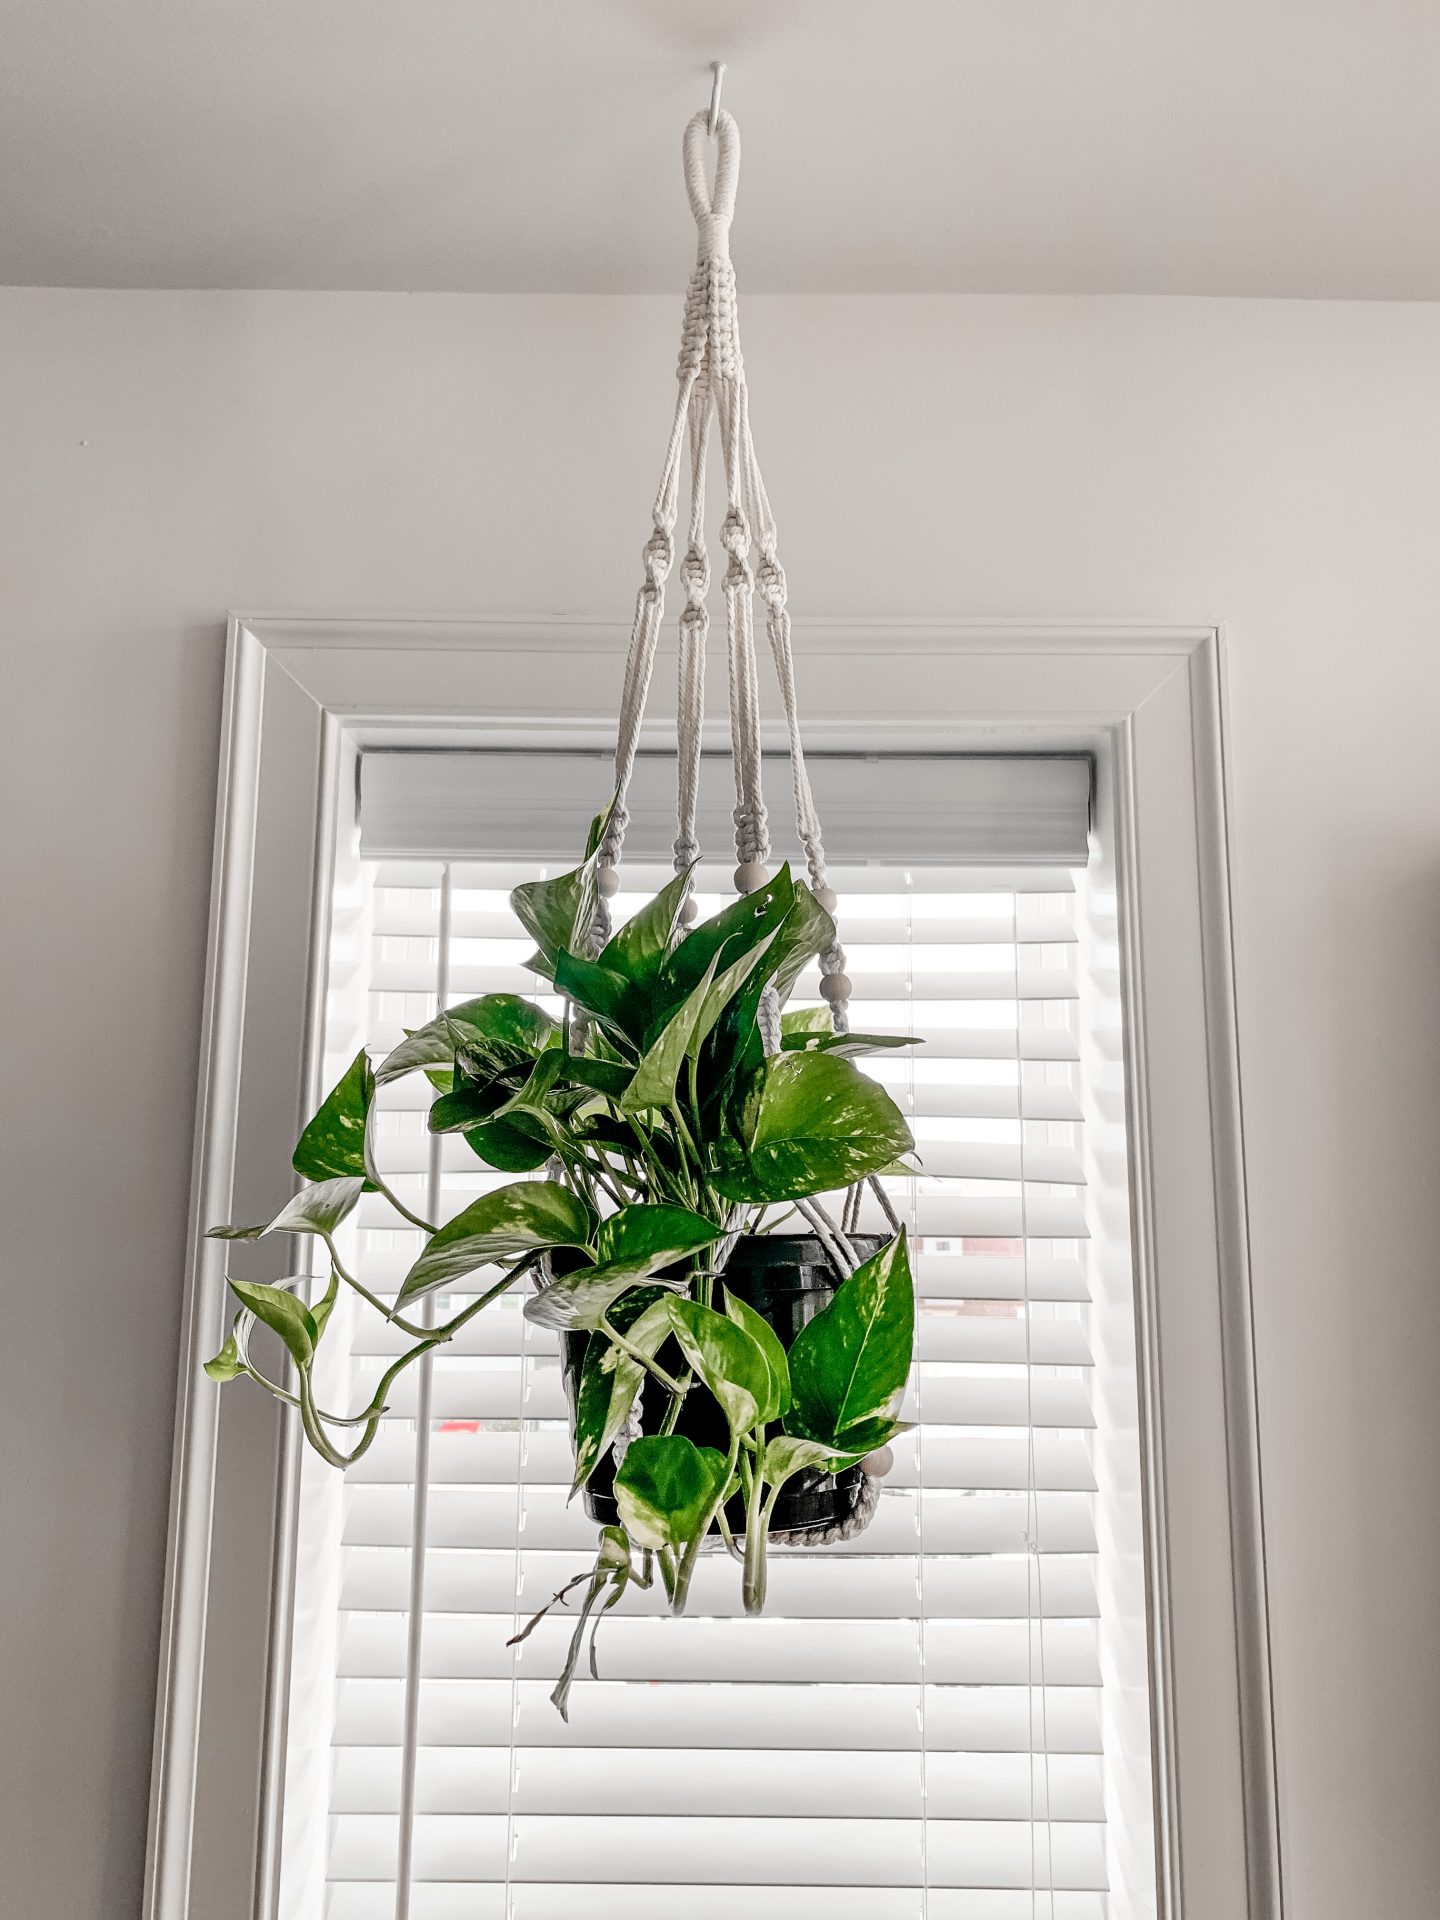 Macrame Hanging Planter with Beads | Best House Plants from Amazon | Kat Viana